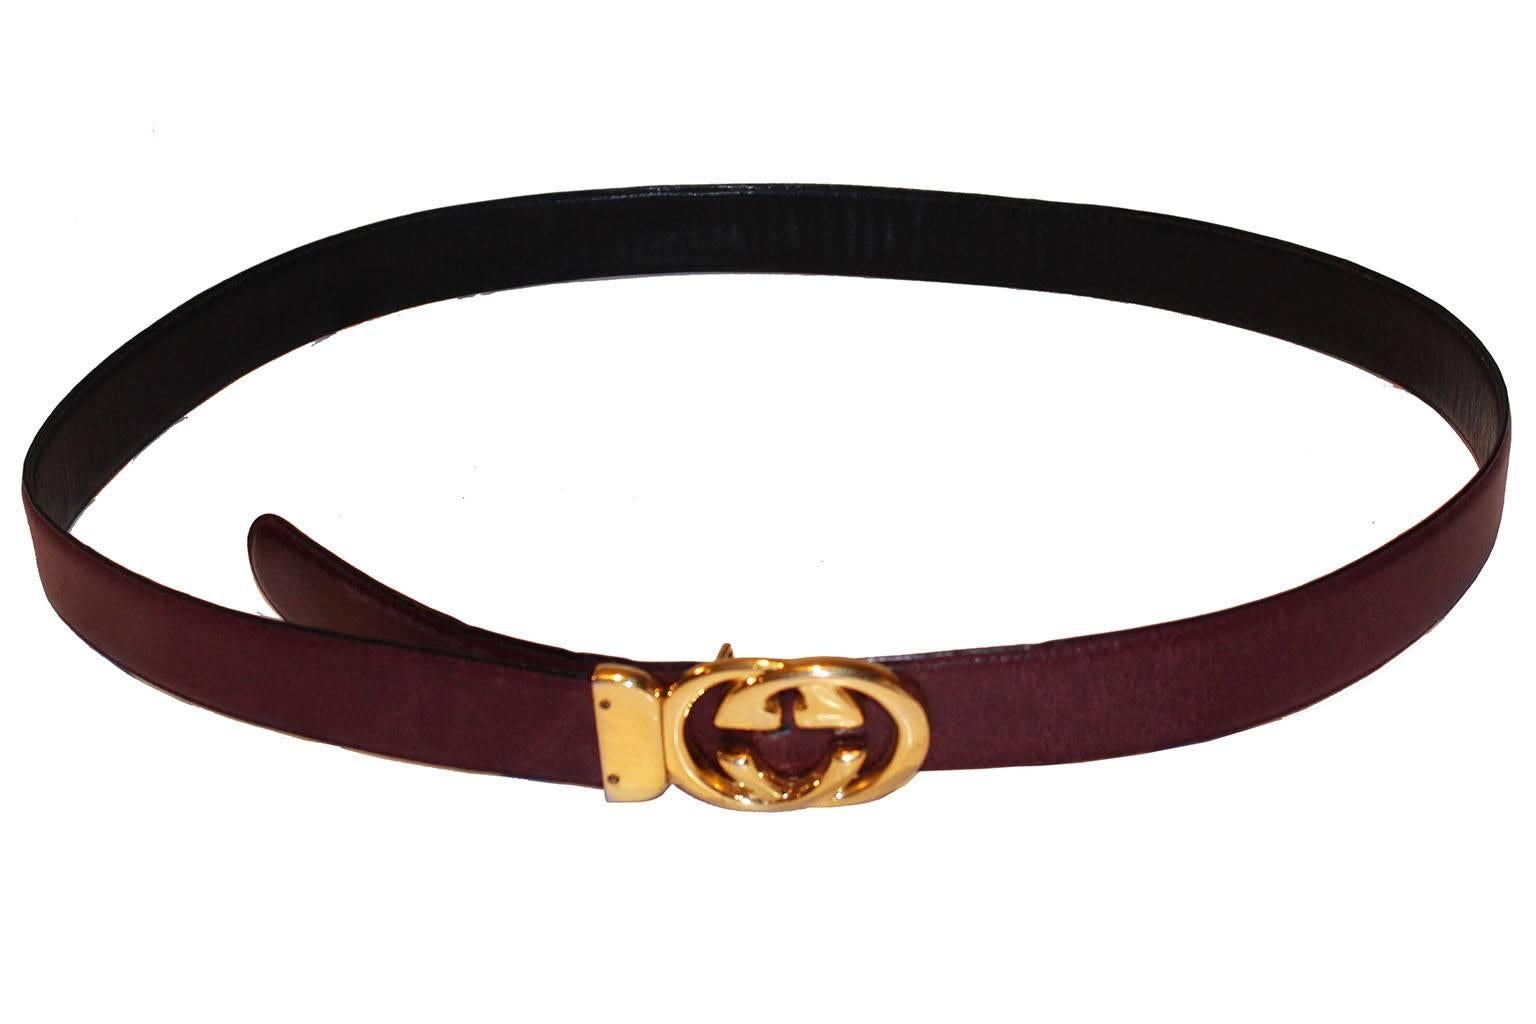 A great belt by Ieading Italian leather firm Gucci. This belt is a wonderful burgundy colour on the outside, and the inside is black leather. As  you would expect from Gucci , the leather is of a high quality. The 'gold' buckle is stamped - Gucci -